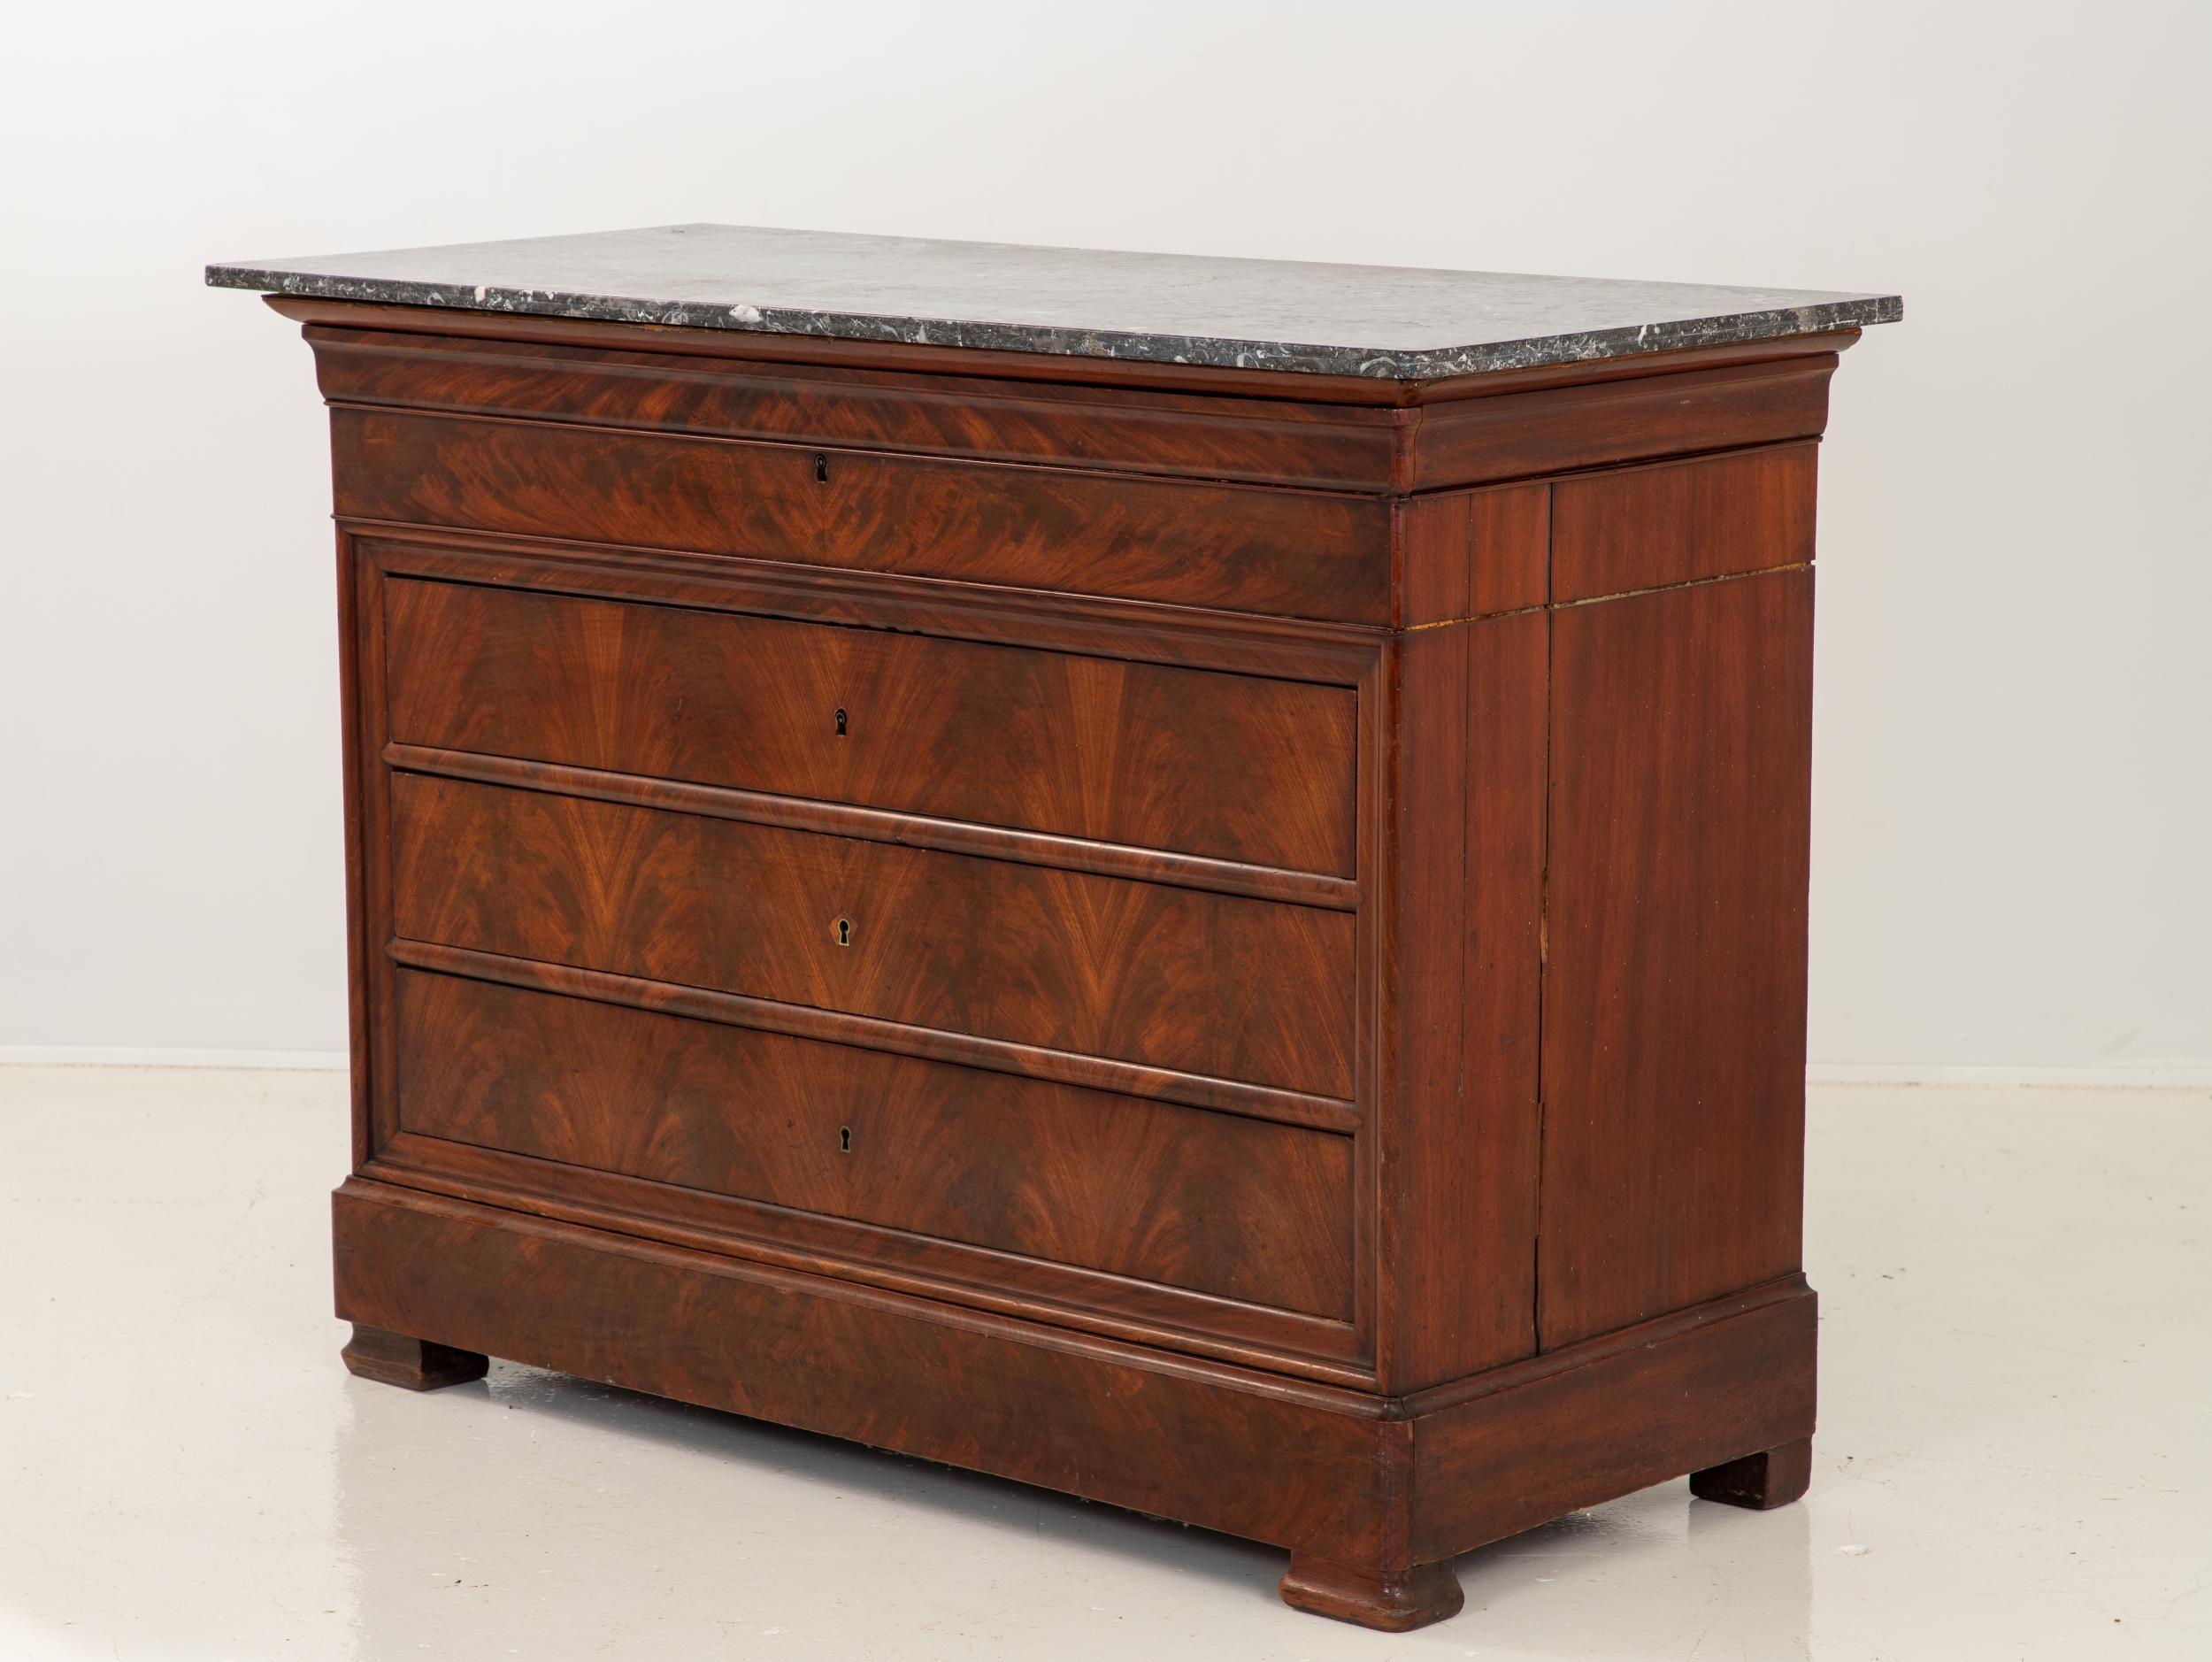 French late 19th century Louis Philippe secretary with a mahogany veneer. The top drawer front folds down and pulls out to reveal a leather writing surface, two drawers, and a pigeon hole. Splits in sides. Wear on leather surface. Repairs to veneer.